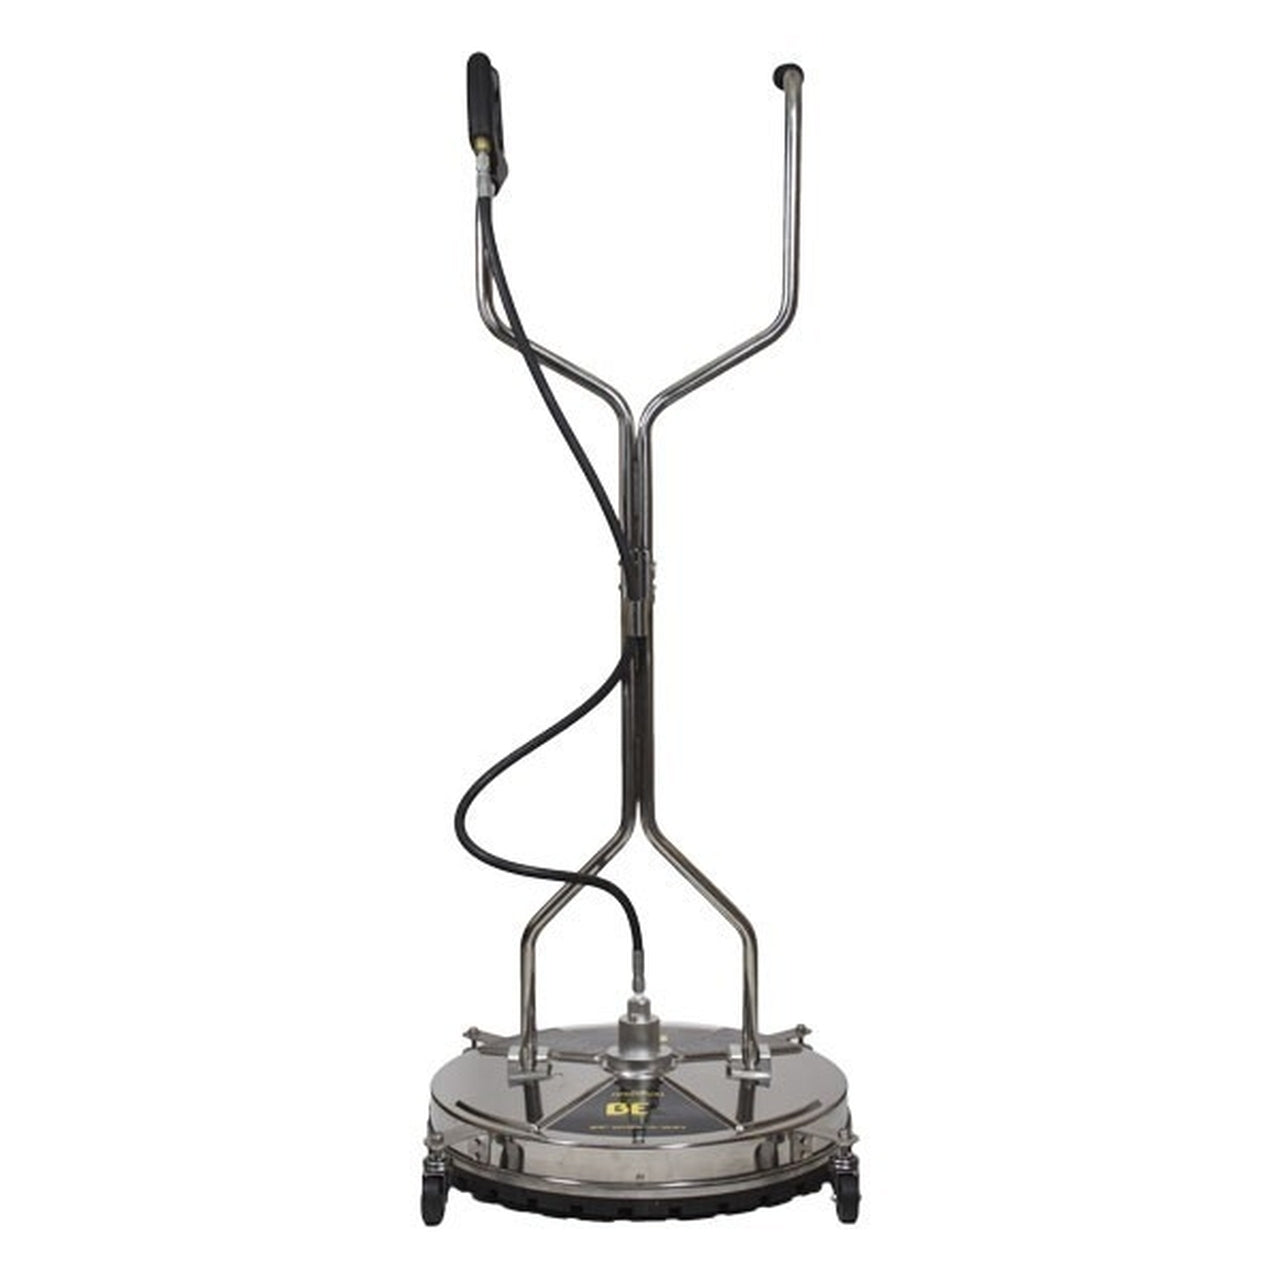 BE-85.403.010-Pressure-Whirlaway-24"-Stainless-Steel-Flat-Surface-Cleaner